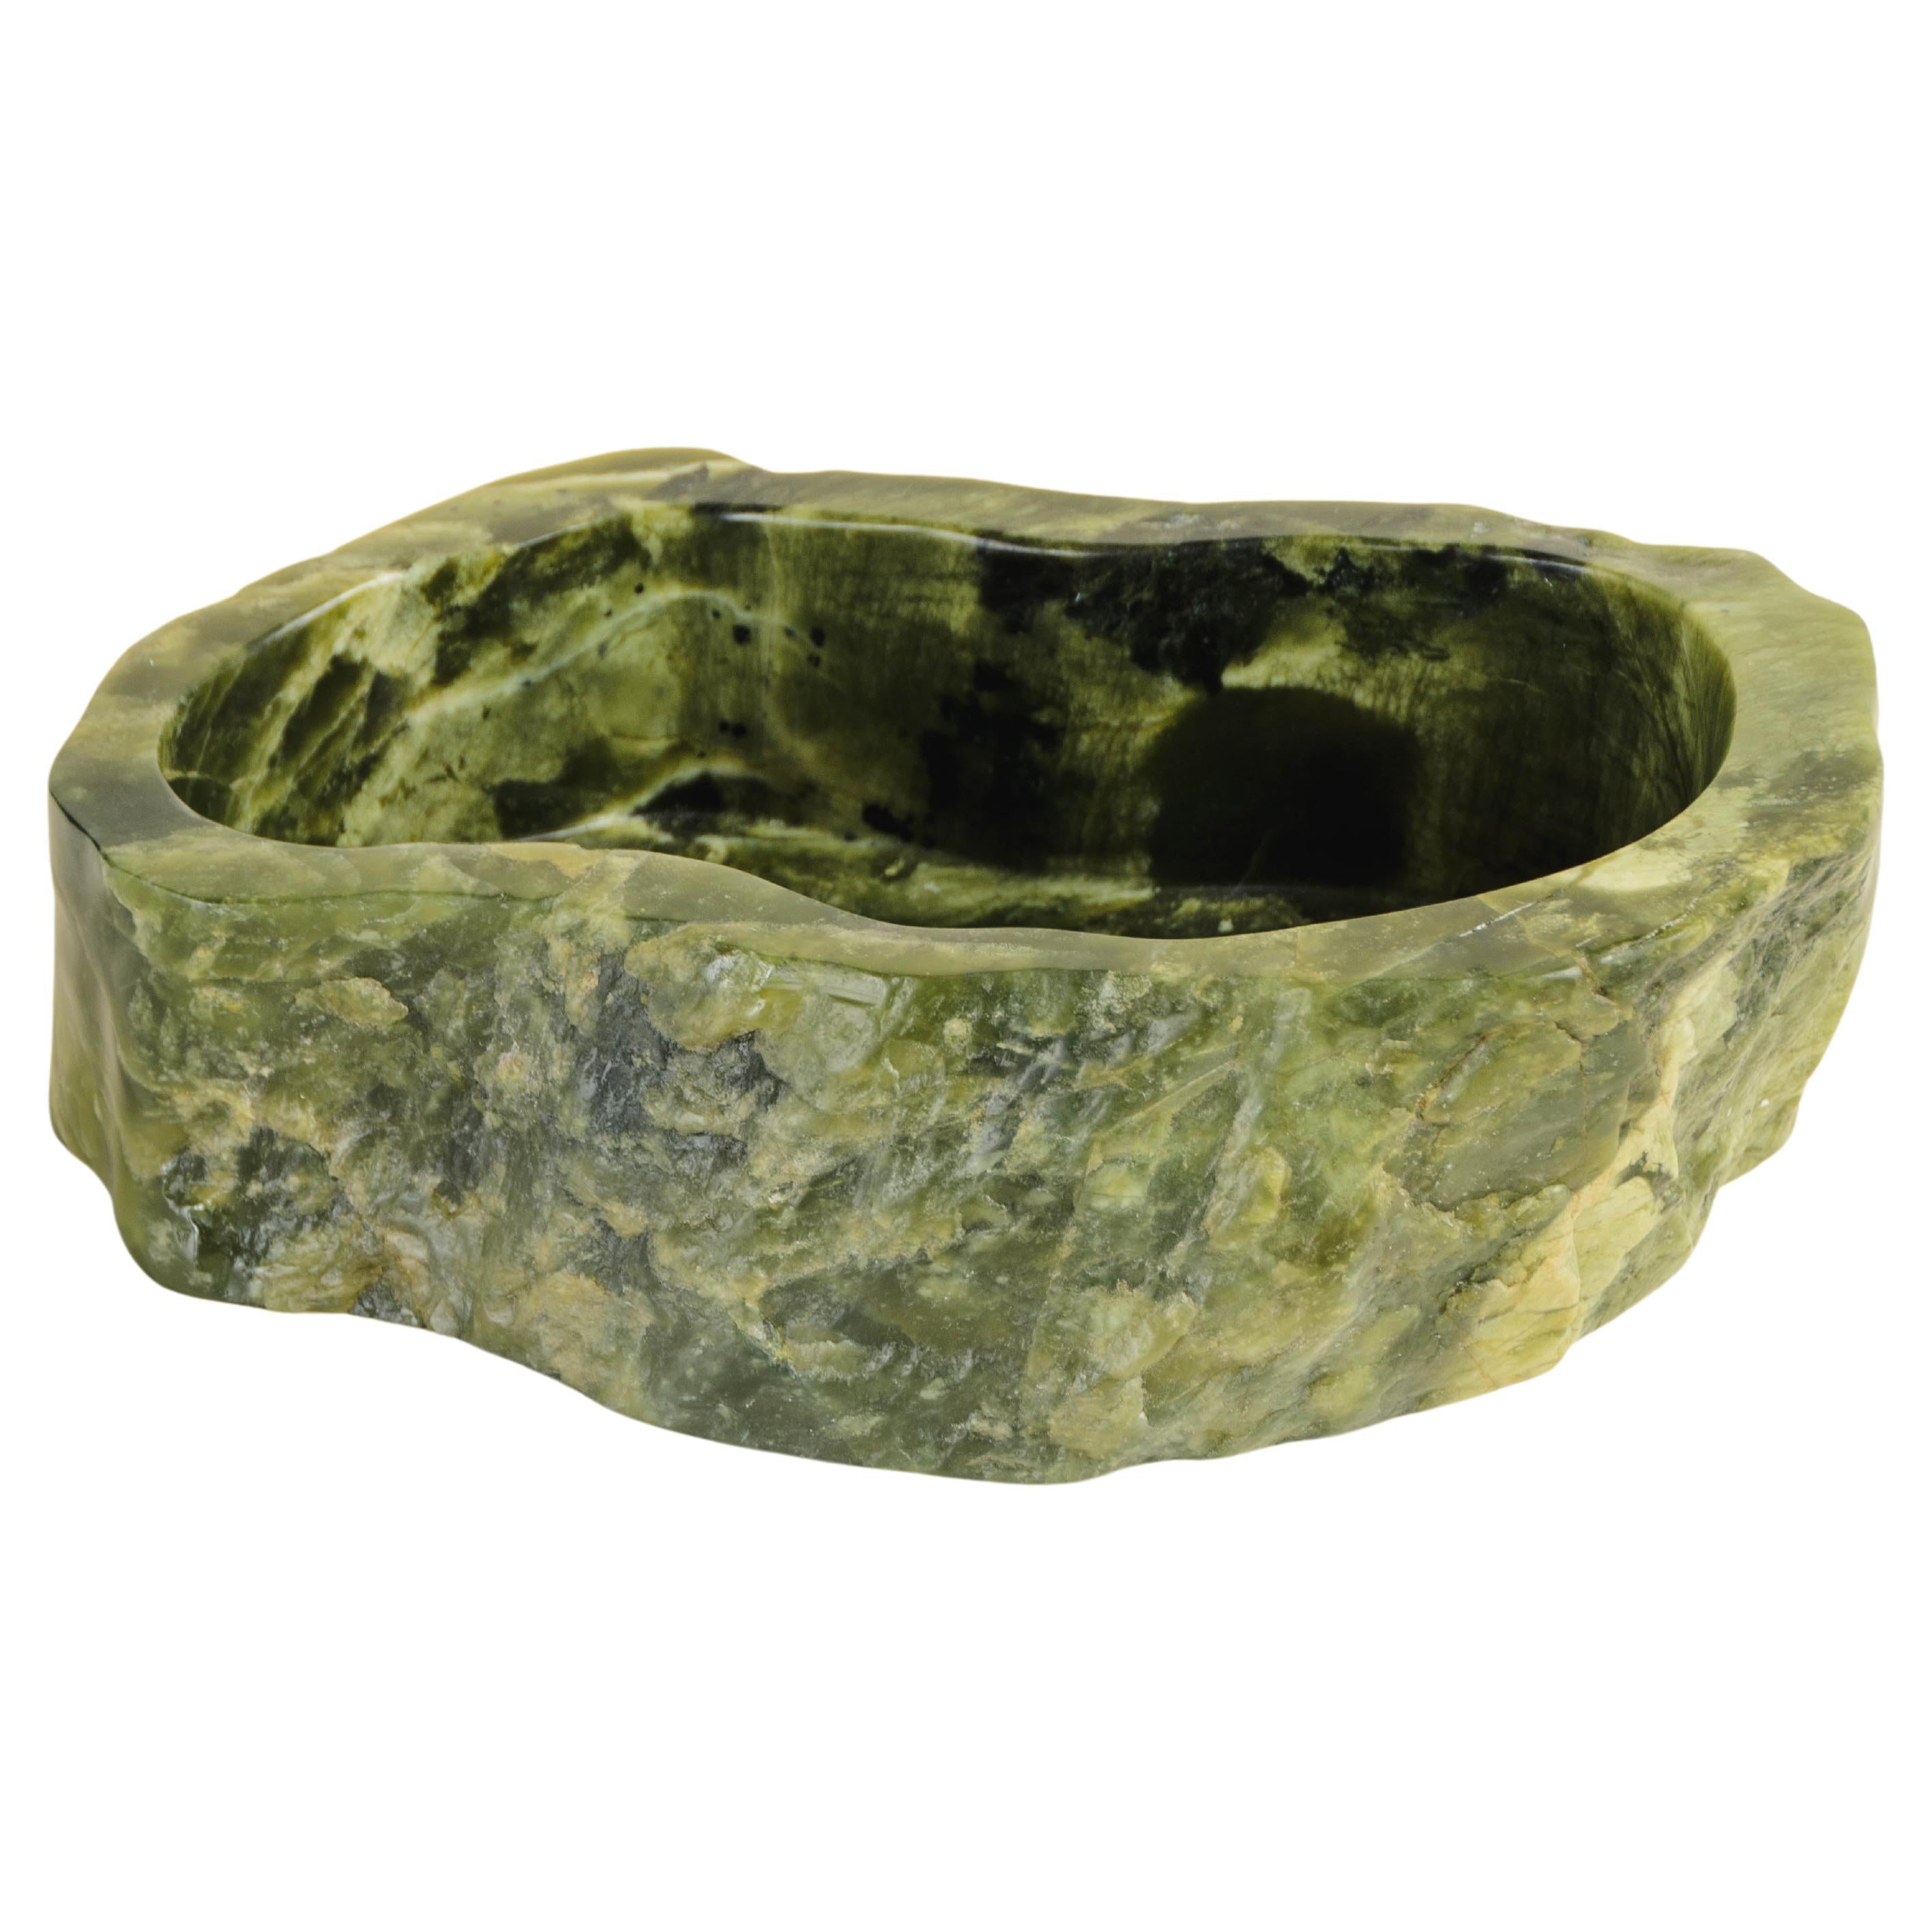 Contemporary Nephrite Jade Oblong Cachepot by Robert Kuo, Limited Edition For Sale